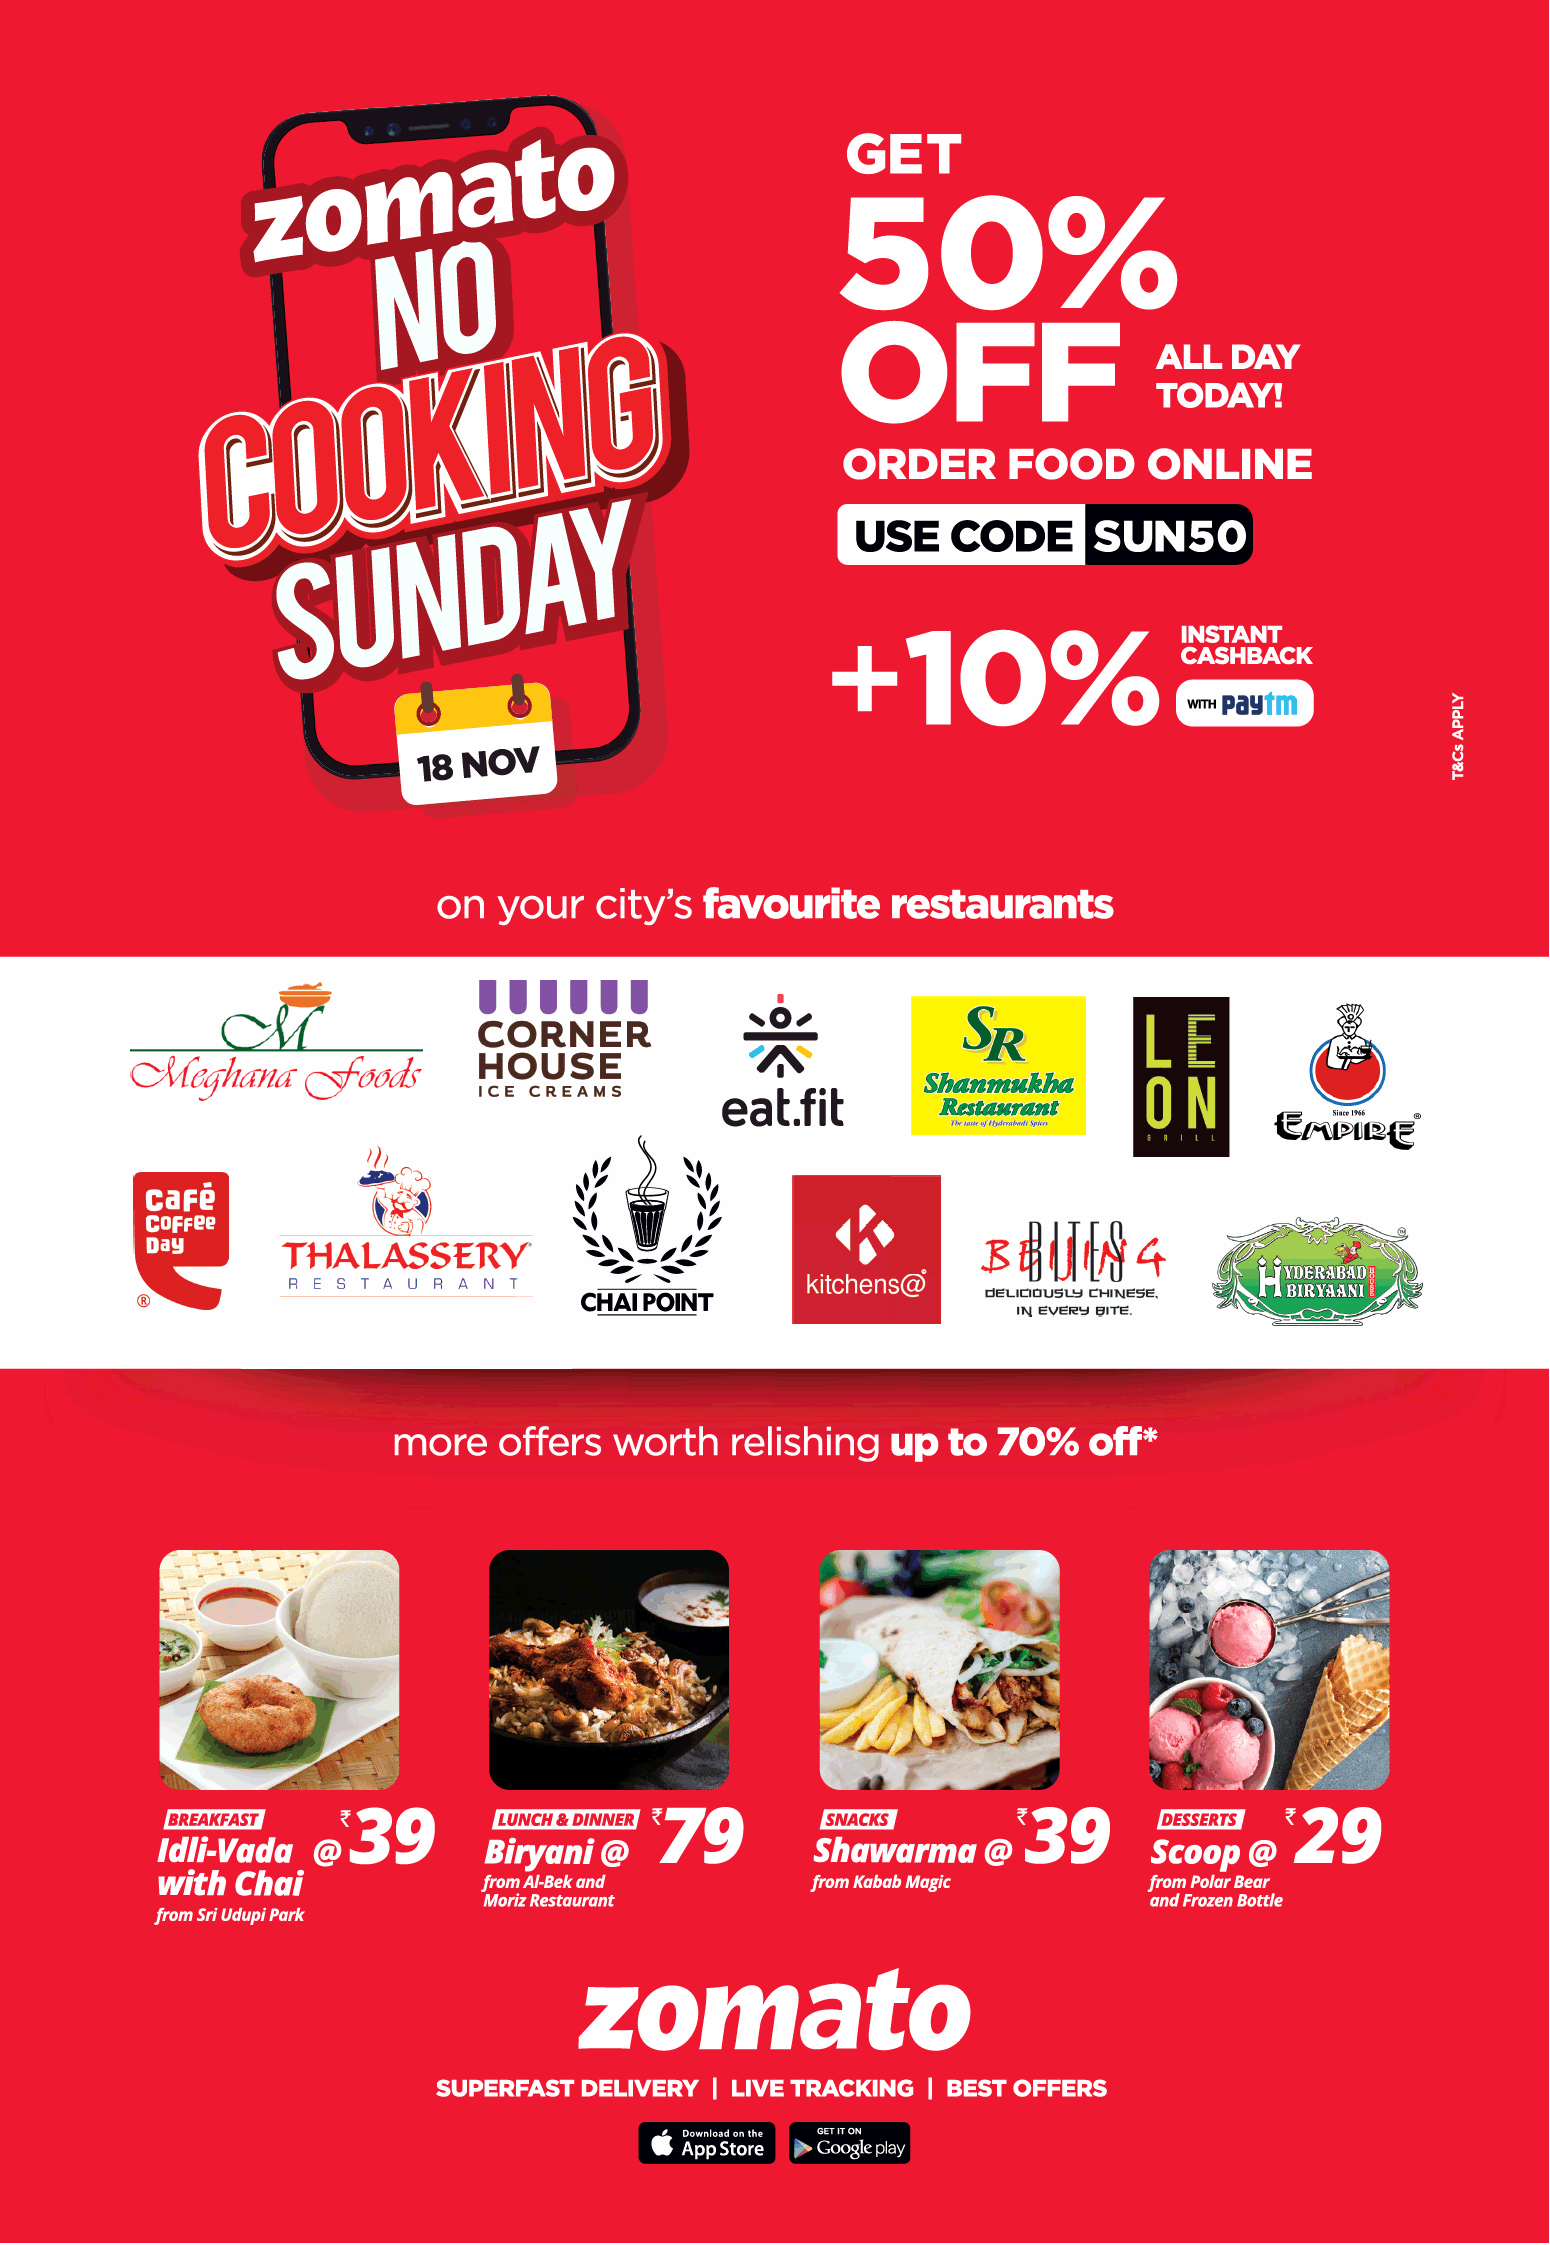 zomato-no-cooking-sunday-get-50%-off-ad-times-of-india-bangalore-18-11-2018.png